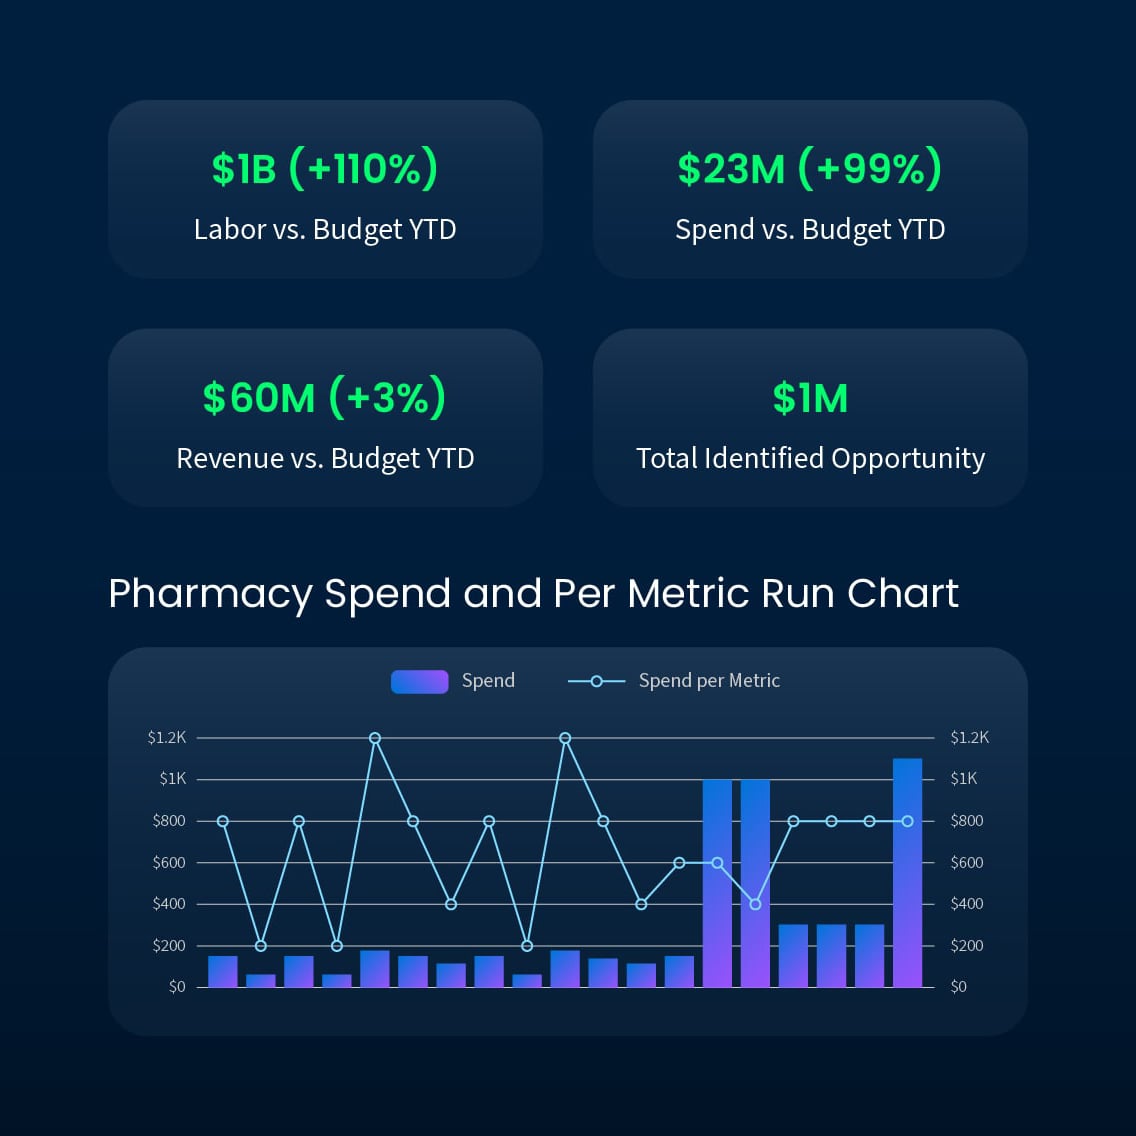 A view of the Saas dashboard view. Labor vs. Budget Year-to-Date, Spend vs. Budget, Year-to-Date, Revenue vs. Budget Year-to-Date, Total Identified Opportunity, Pharmacy Spend and Per Metric Run Chart